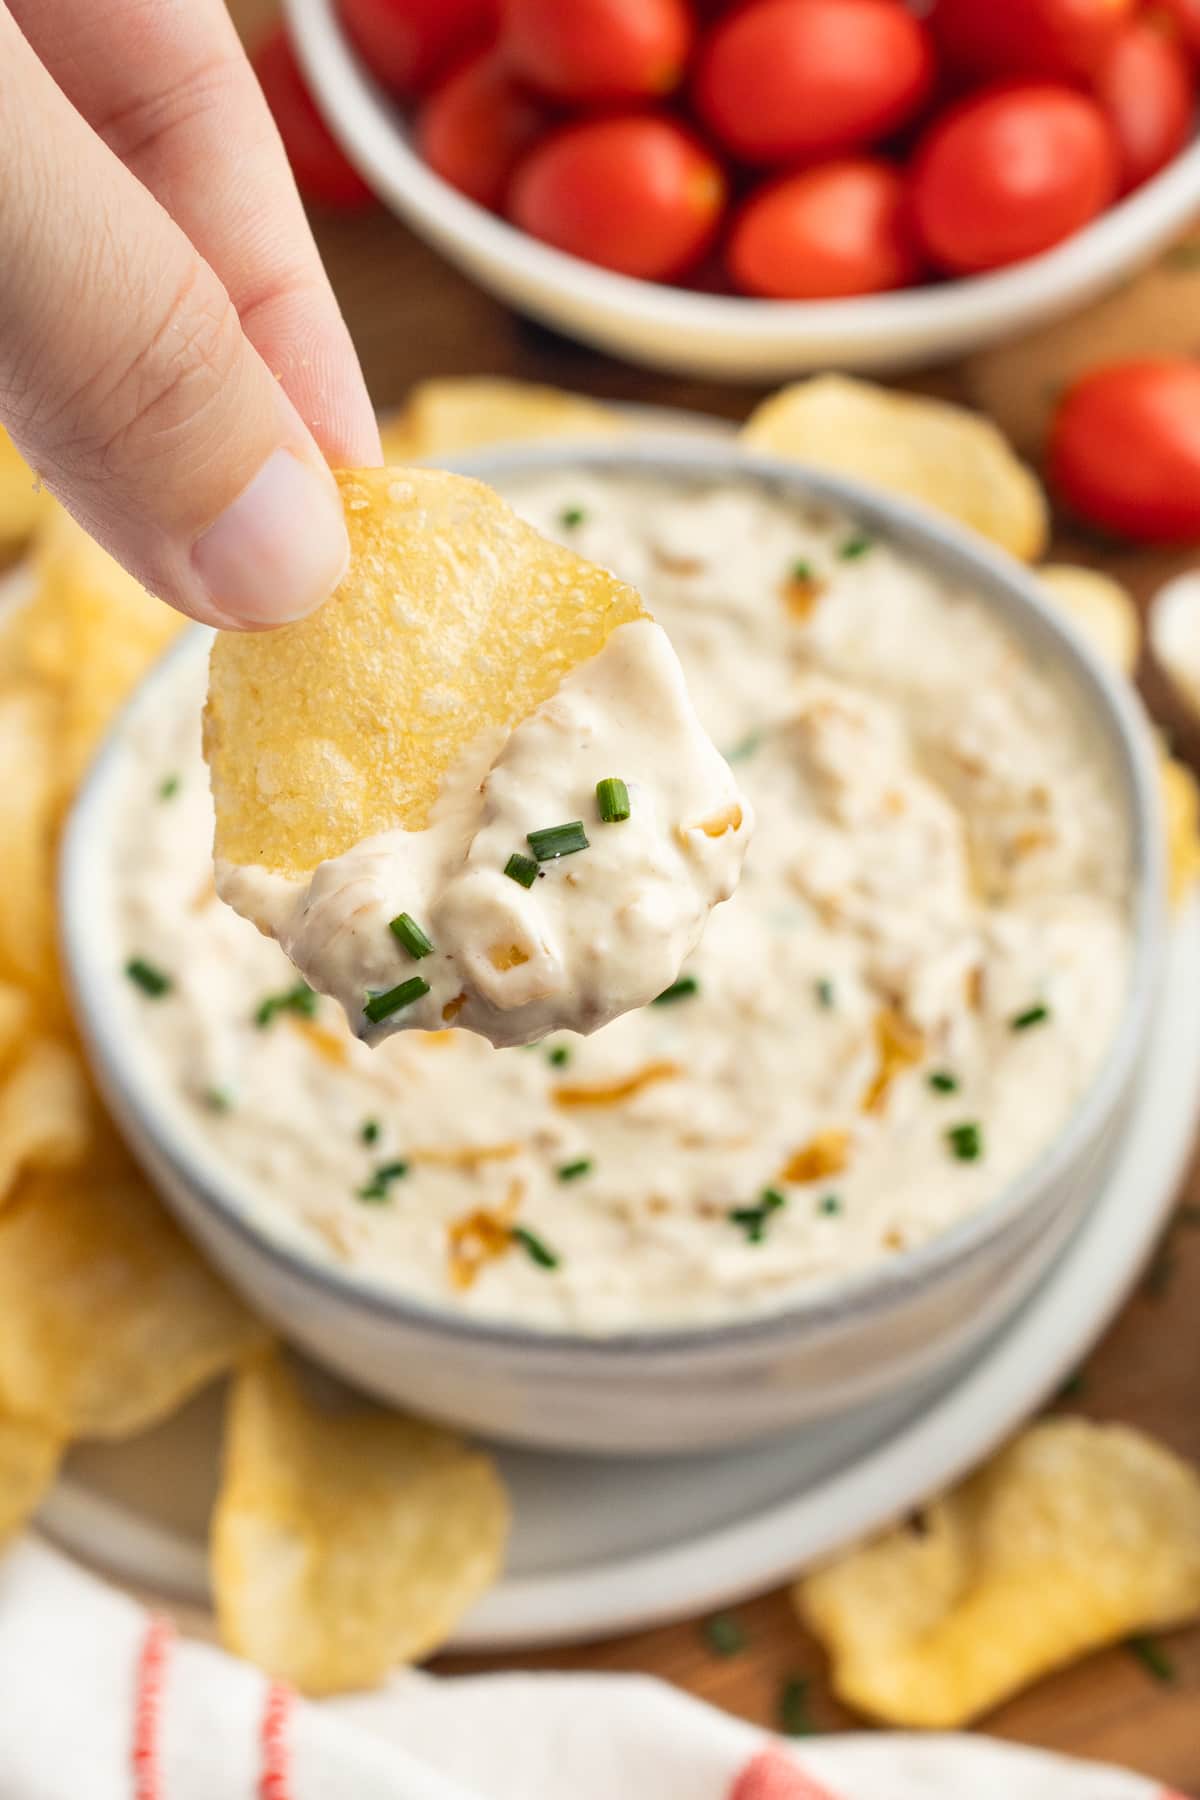 This is a picture of a chip with onion dip.